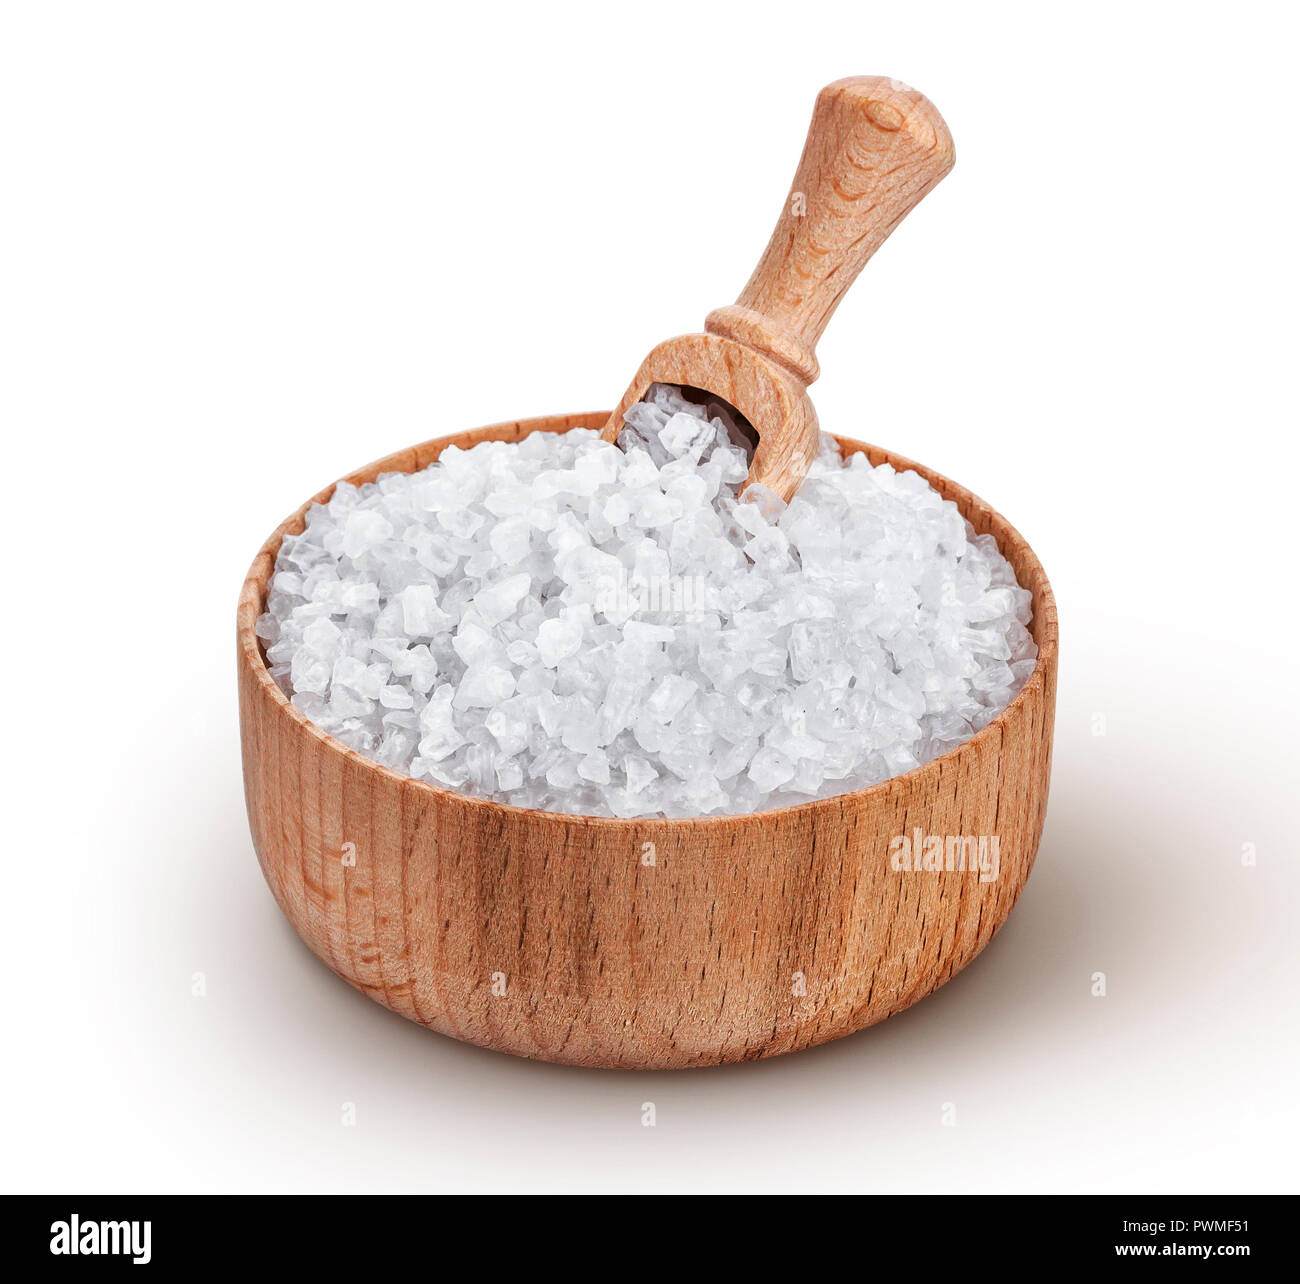 Sea salt in wooden bowl with scoop isolated on white background Stock Photo